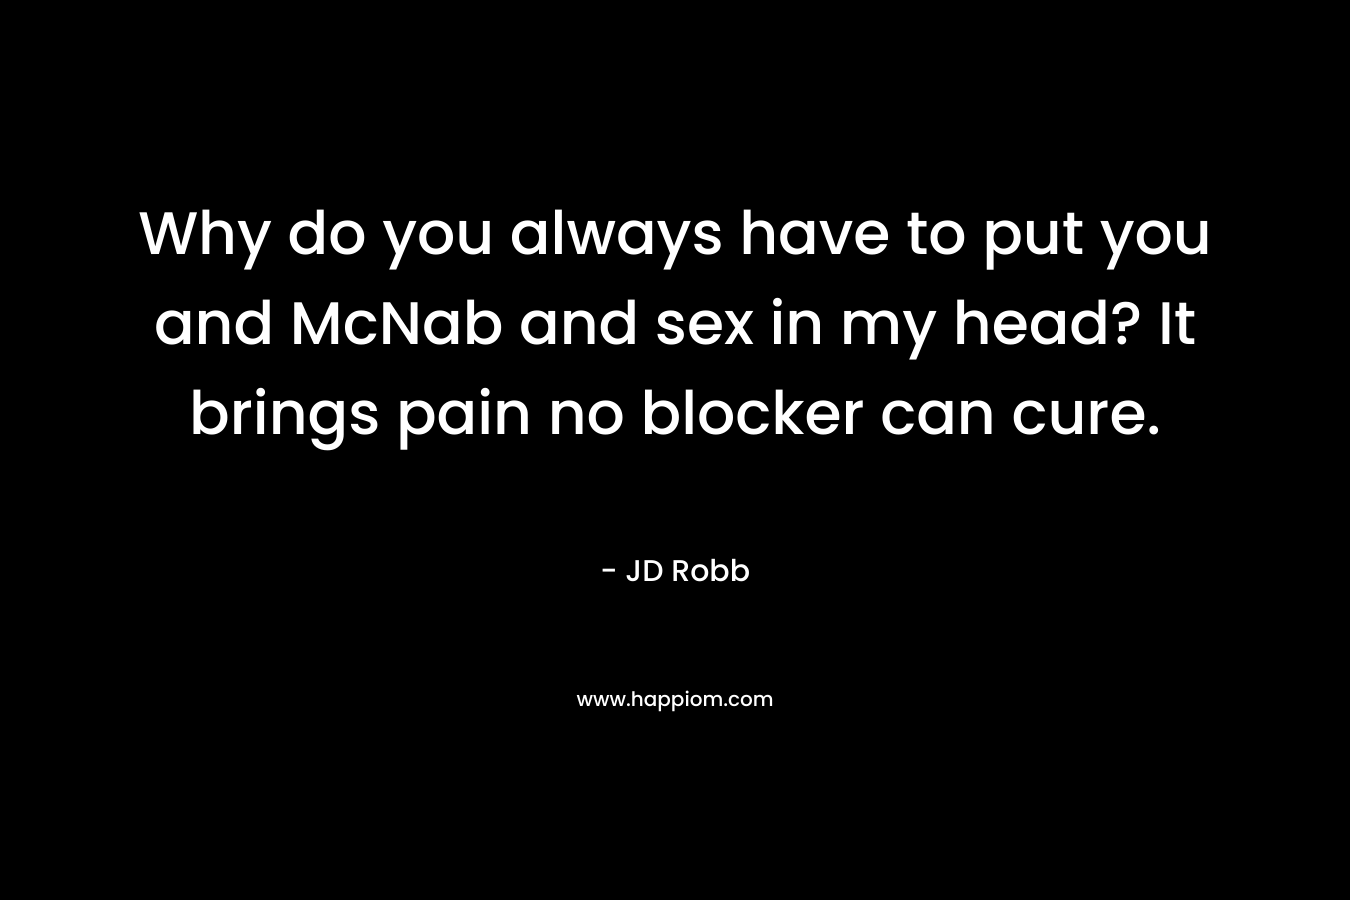 Why do you always have to put you and McNab and sex in my head? It brings pain no blocker can cure. – JD Robb